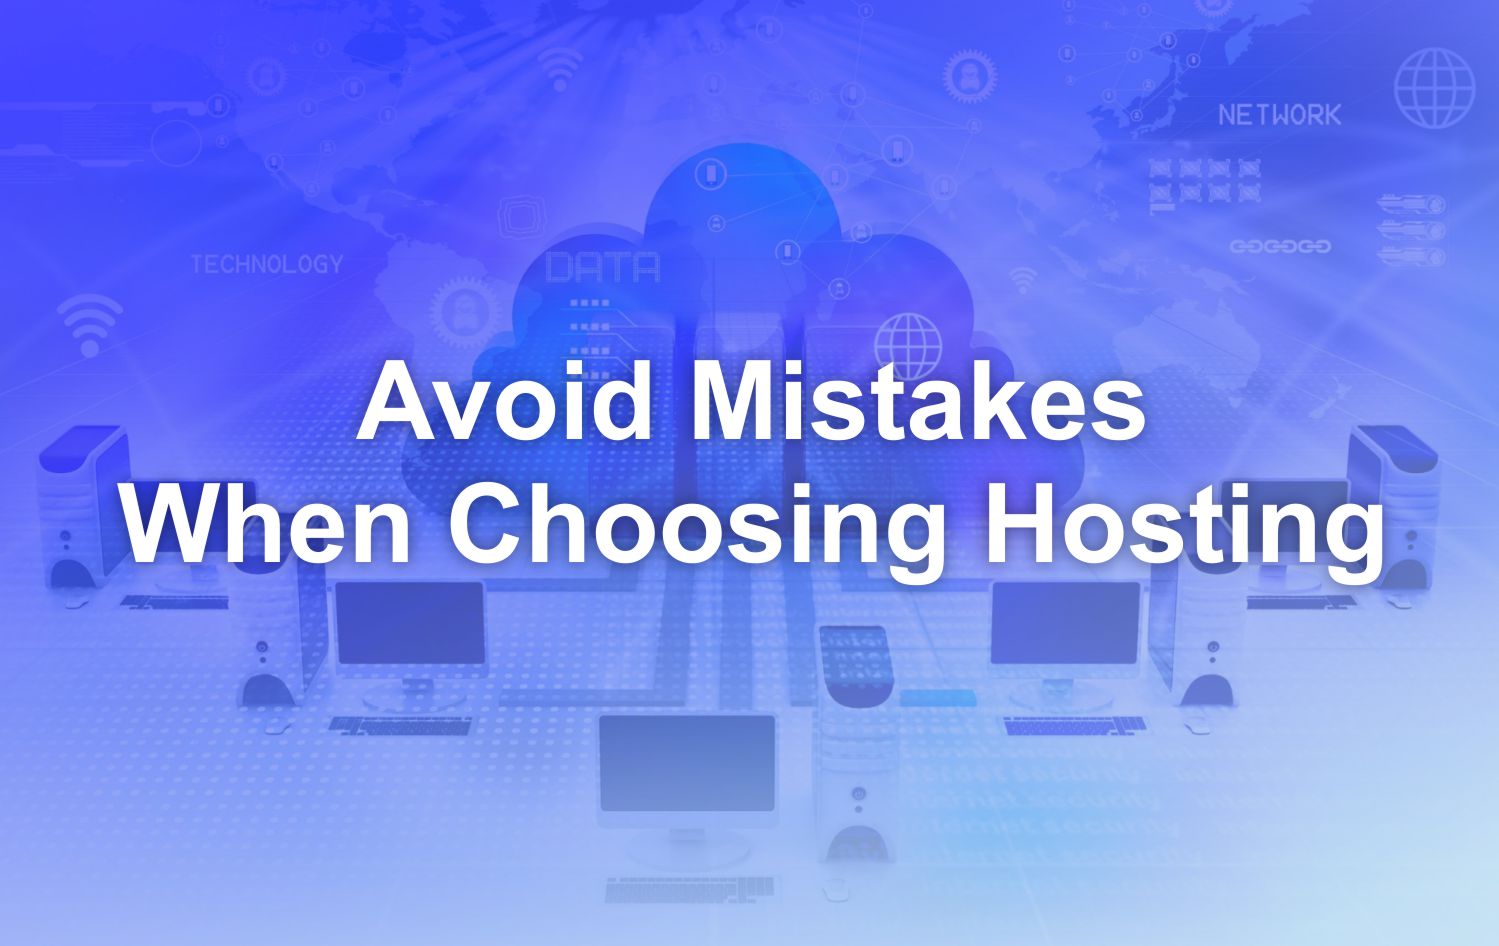 Get Your Web Hosting Right: How to Avoid Common Mistakes and Choose the Best Provider